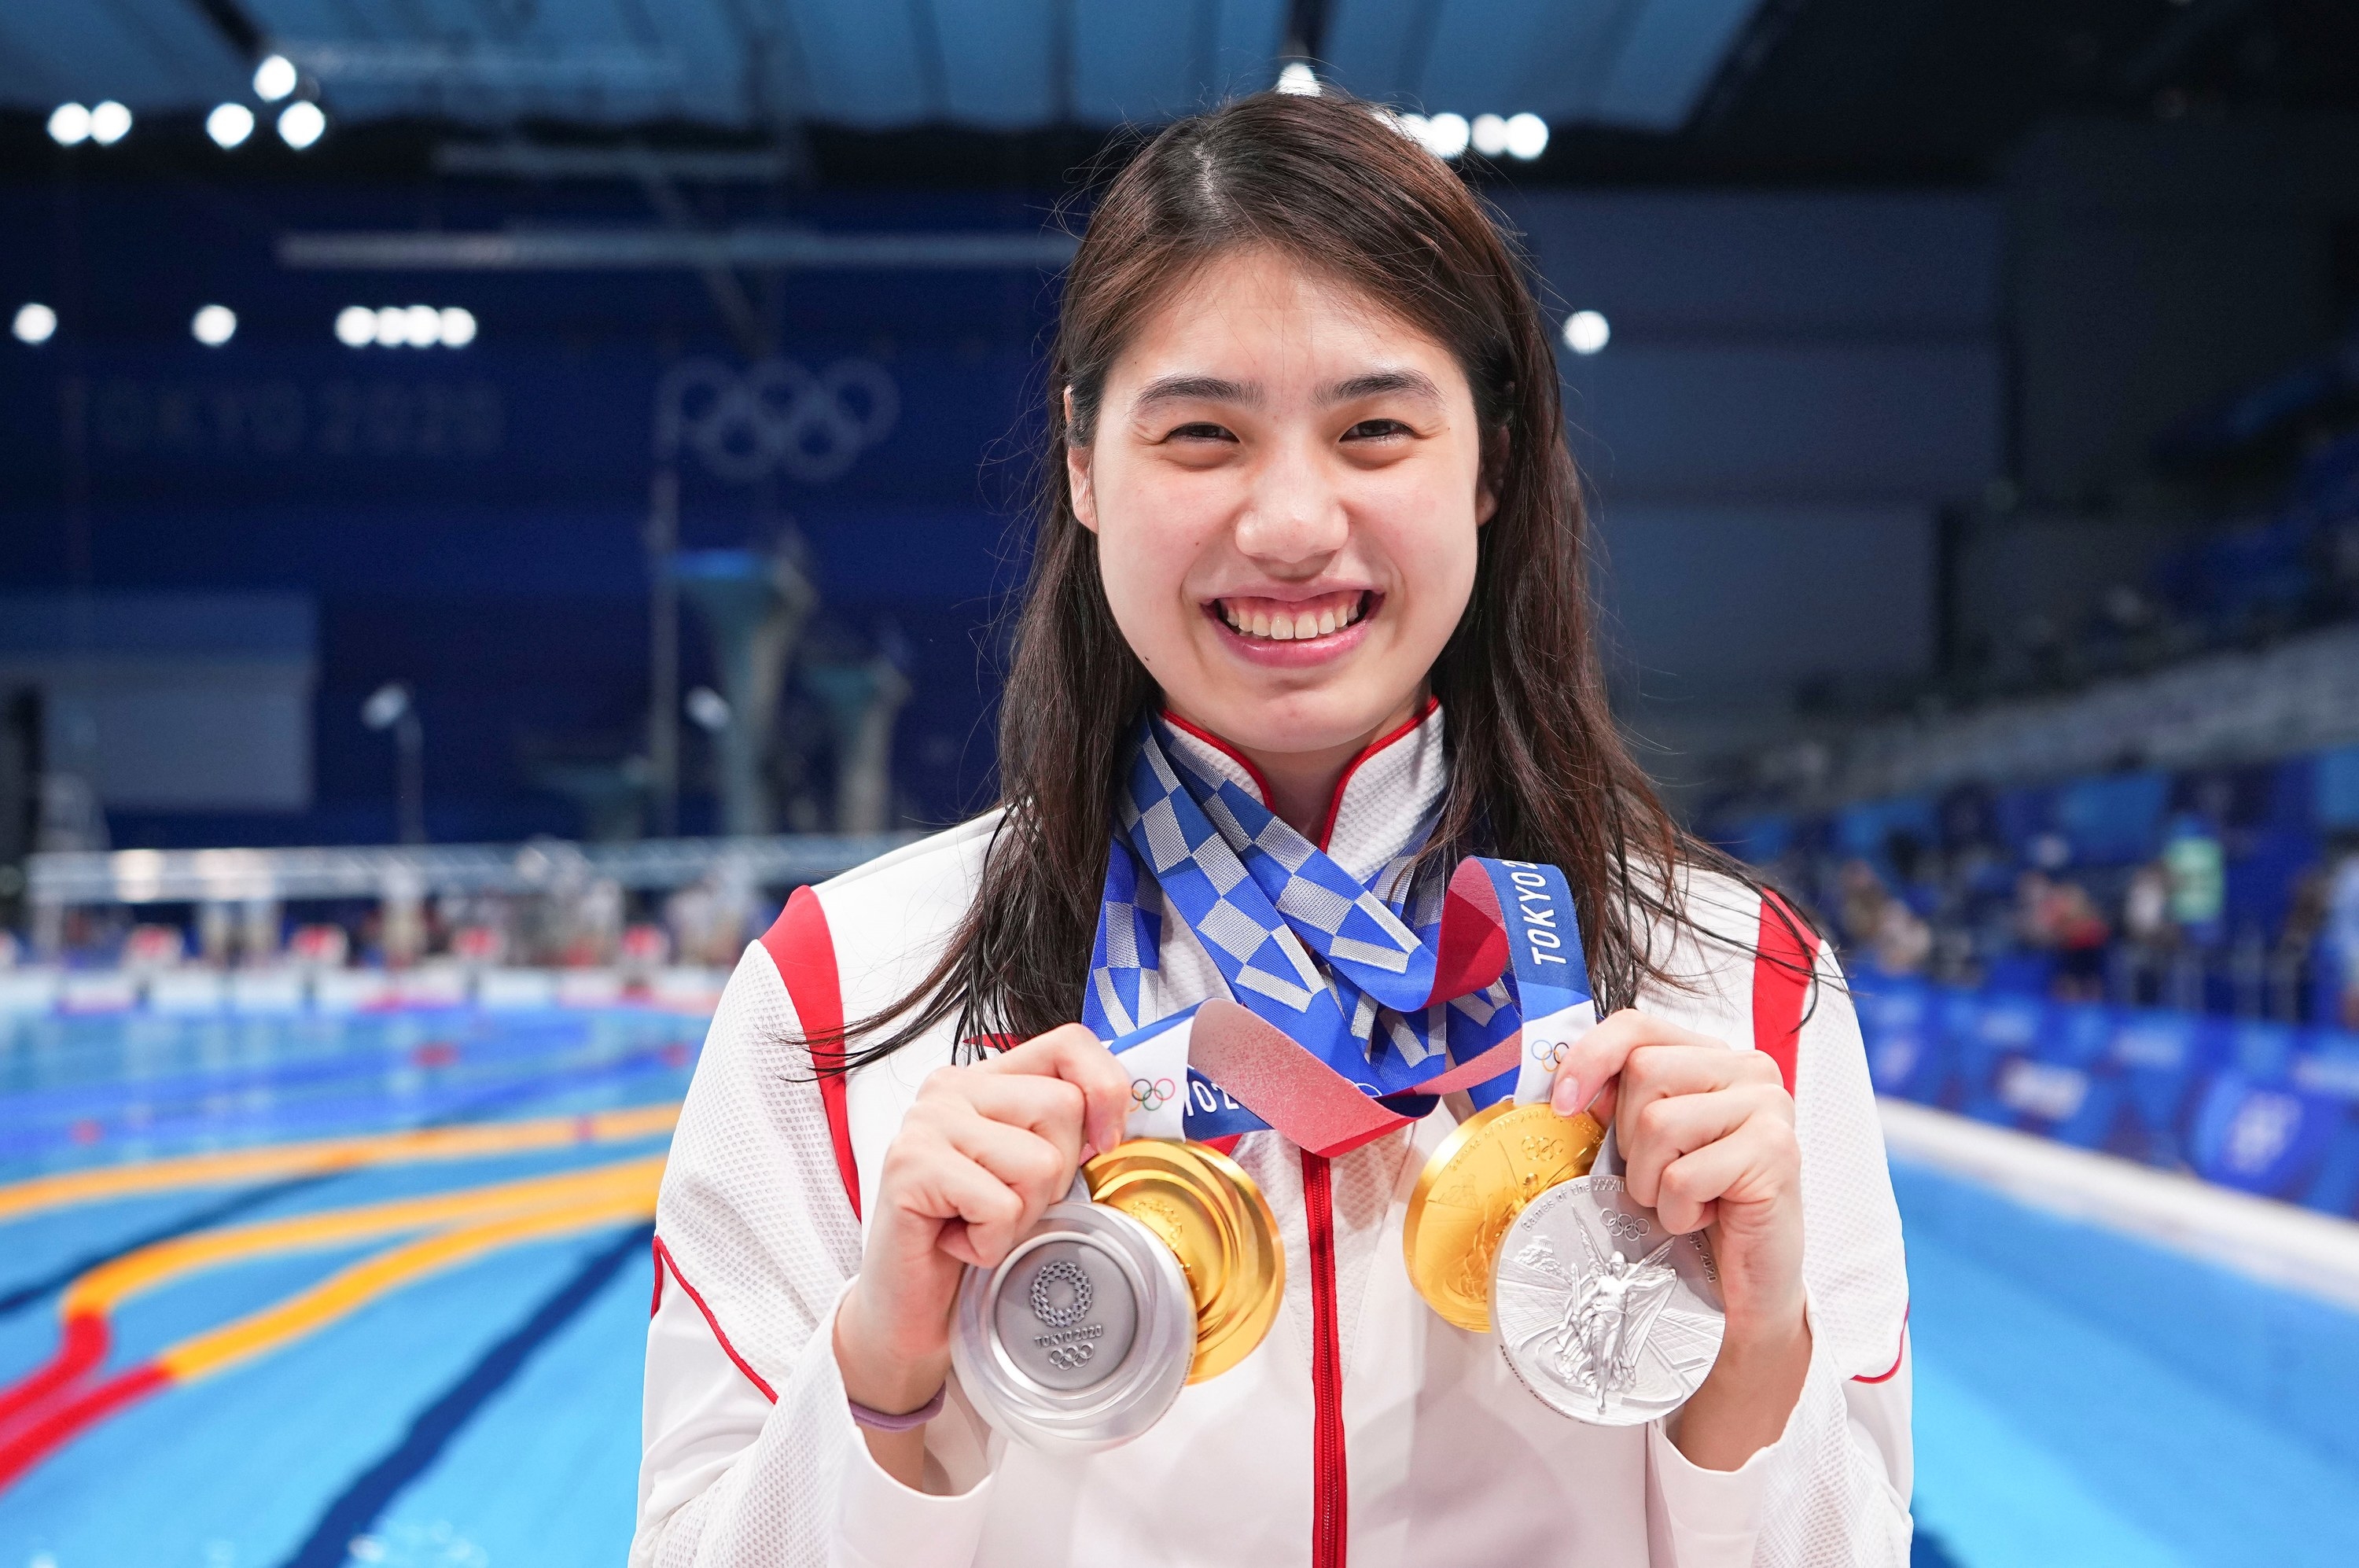 Zhang Yufei smiles as she poses with four medals around her neck